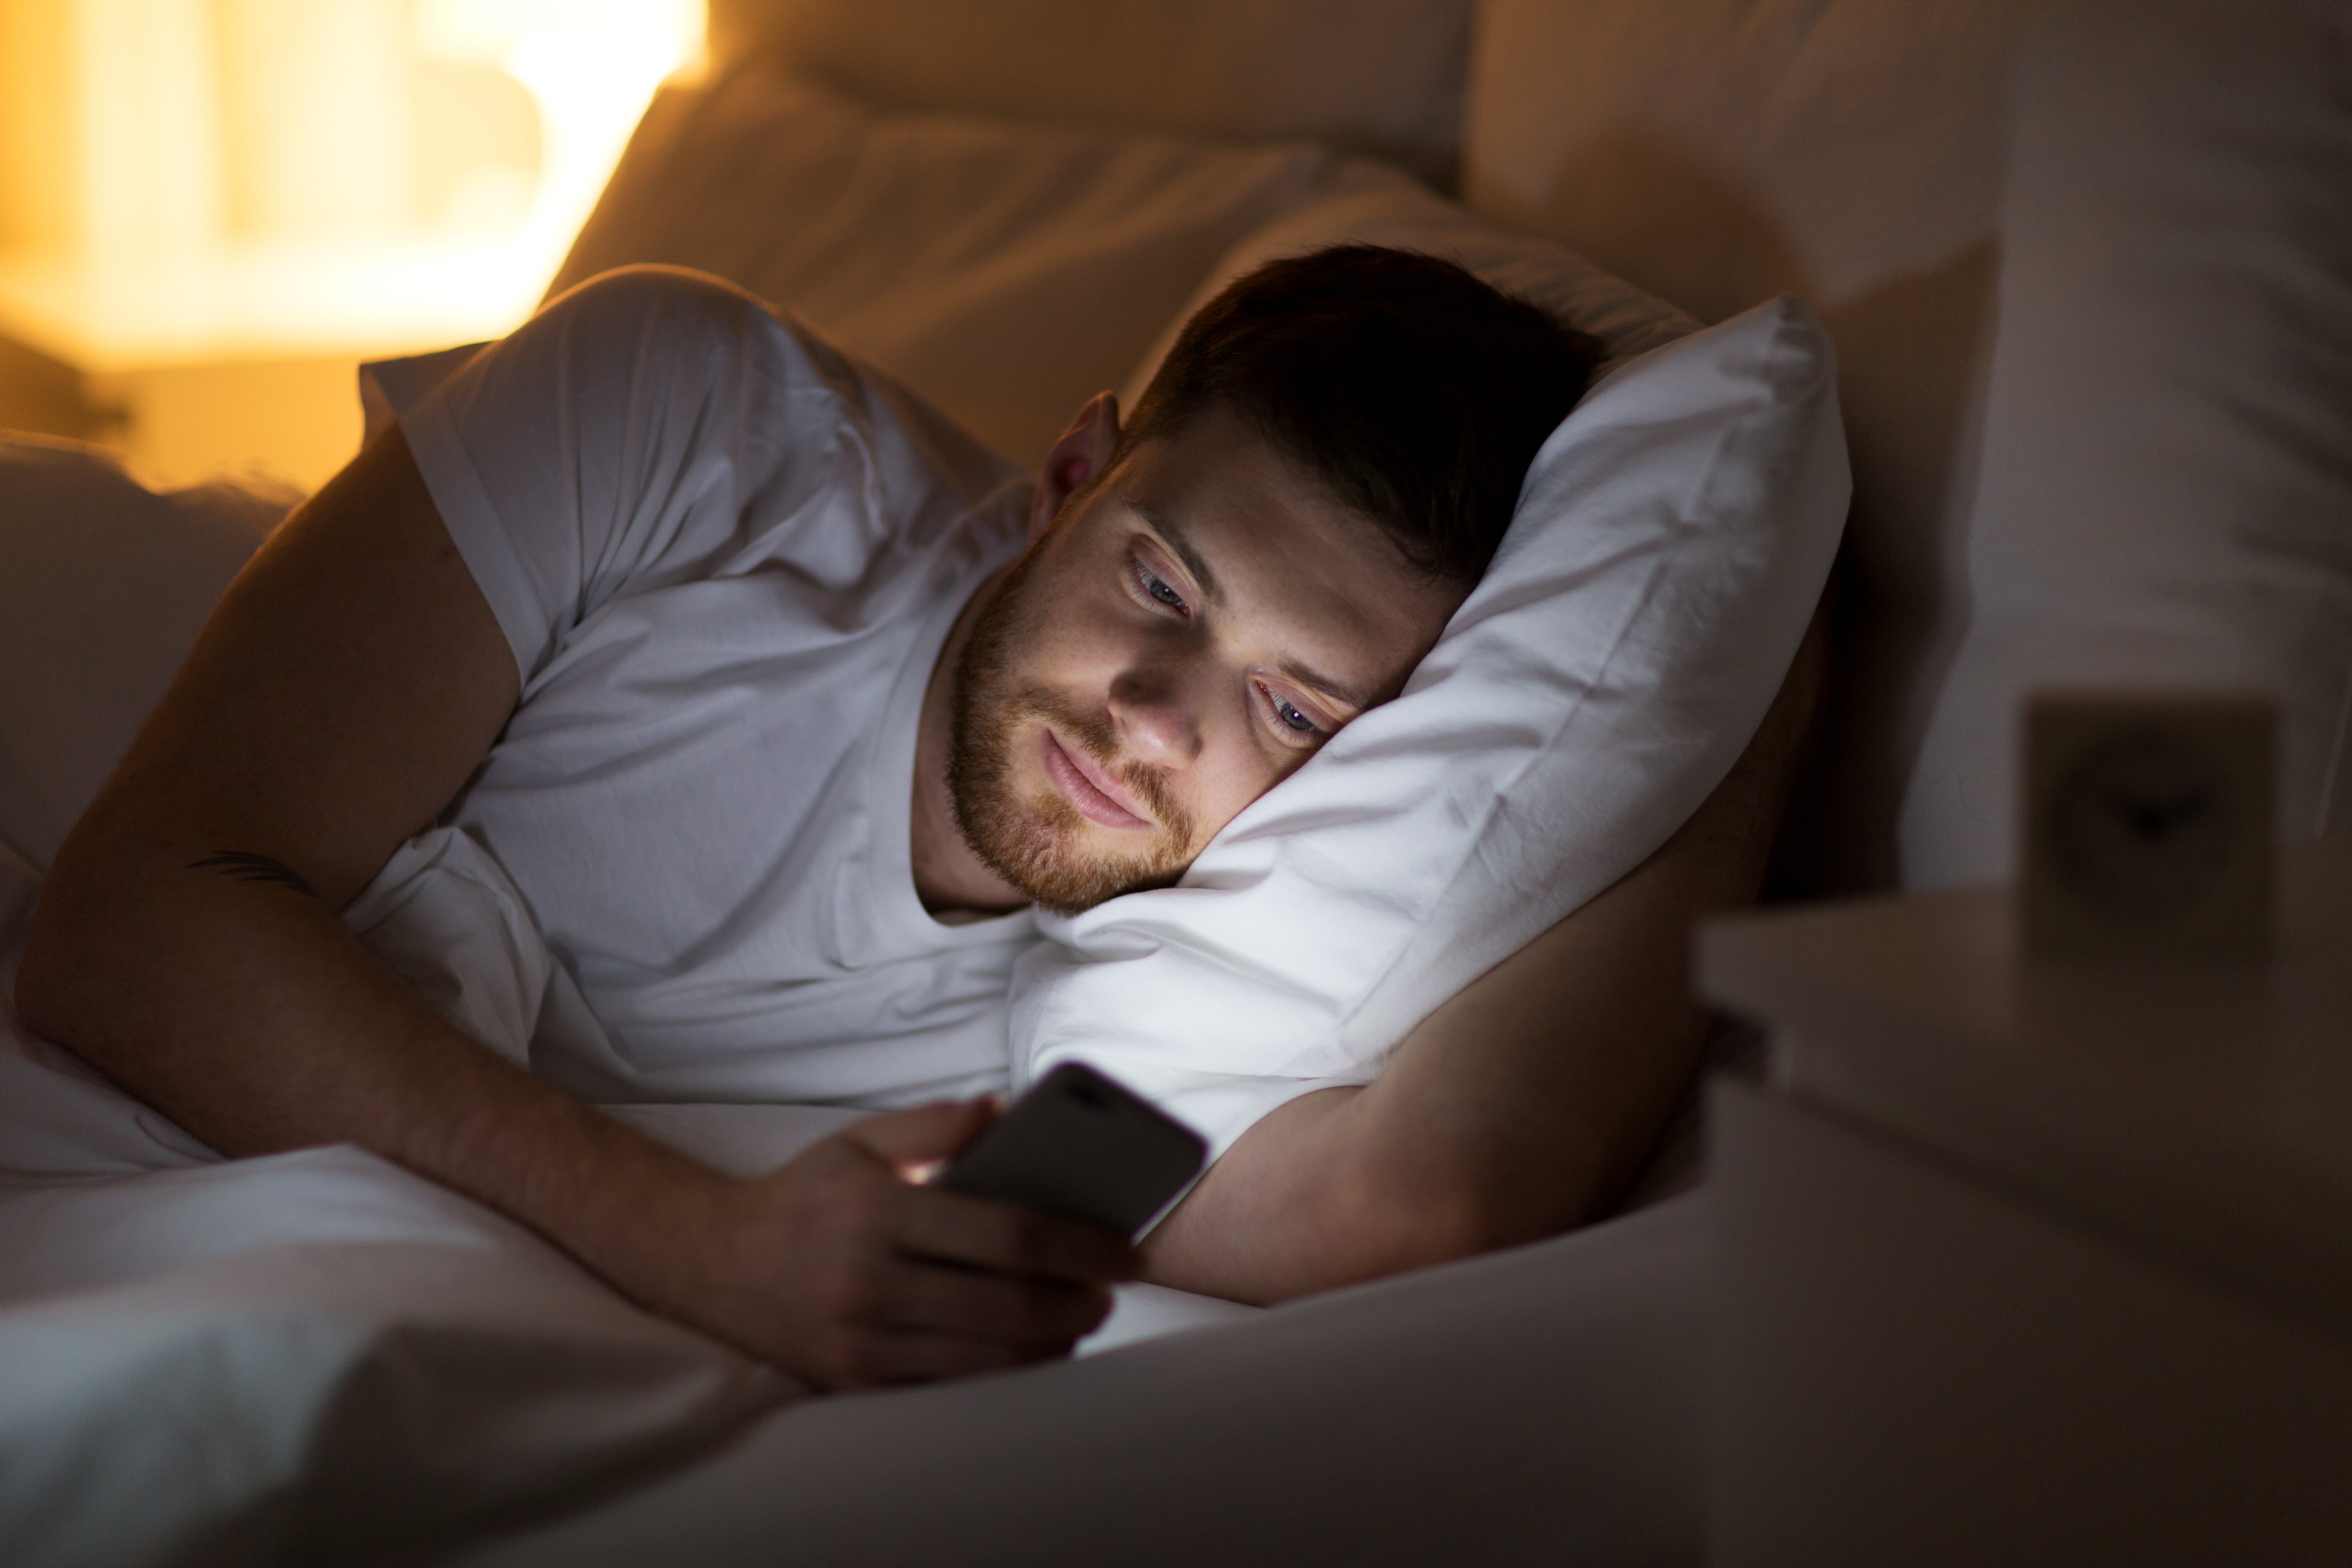 A man, lay in bed, scrolling through social media on his smartphone before going to sleep.